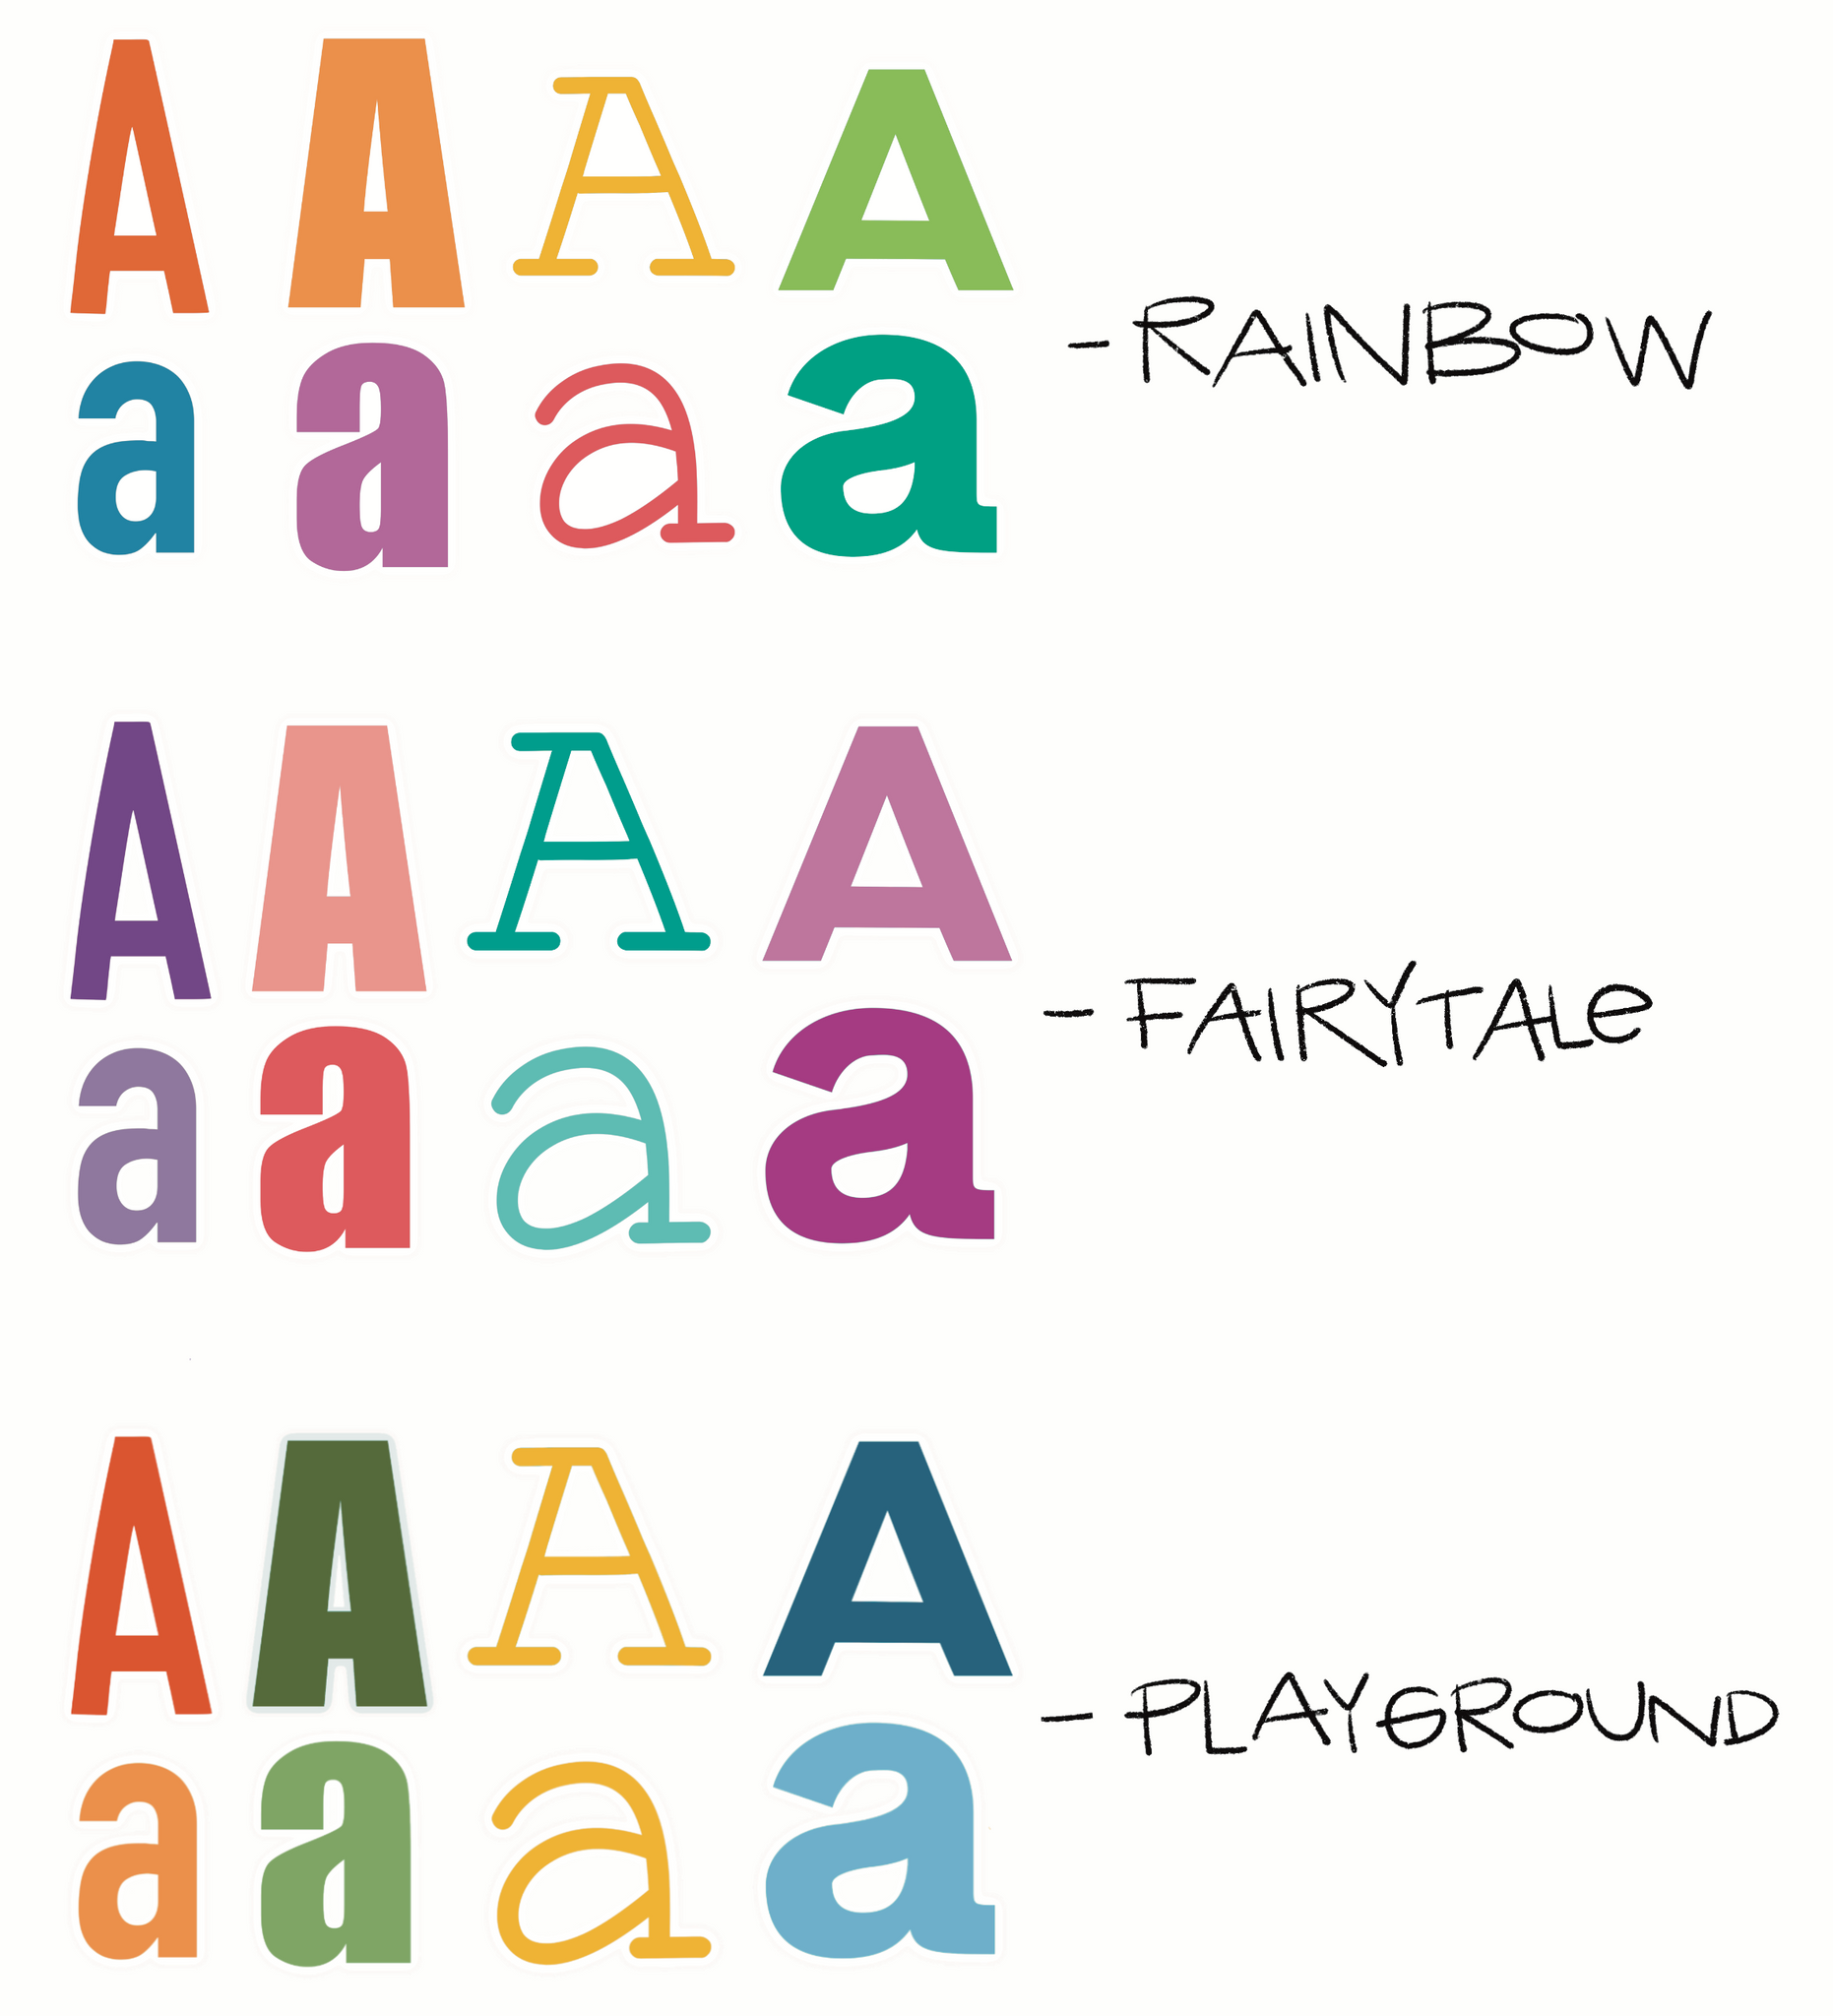 PS Sheet Musical Alphabet Stickers Rainbow – The Practice Shoppe